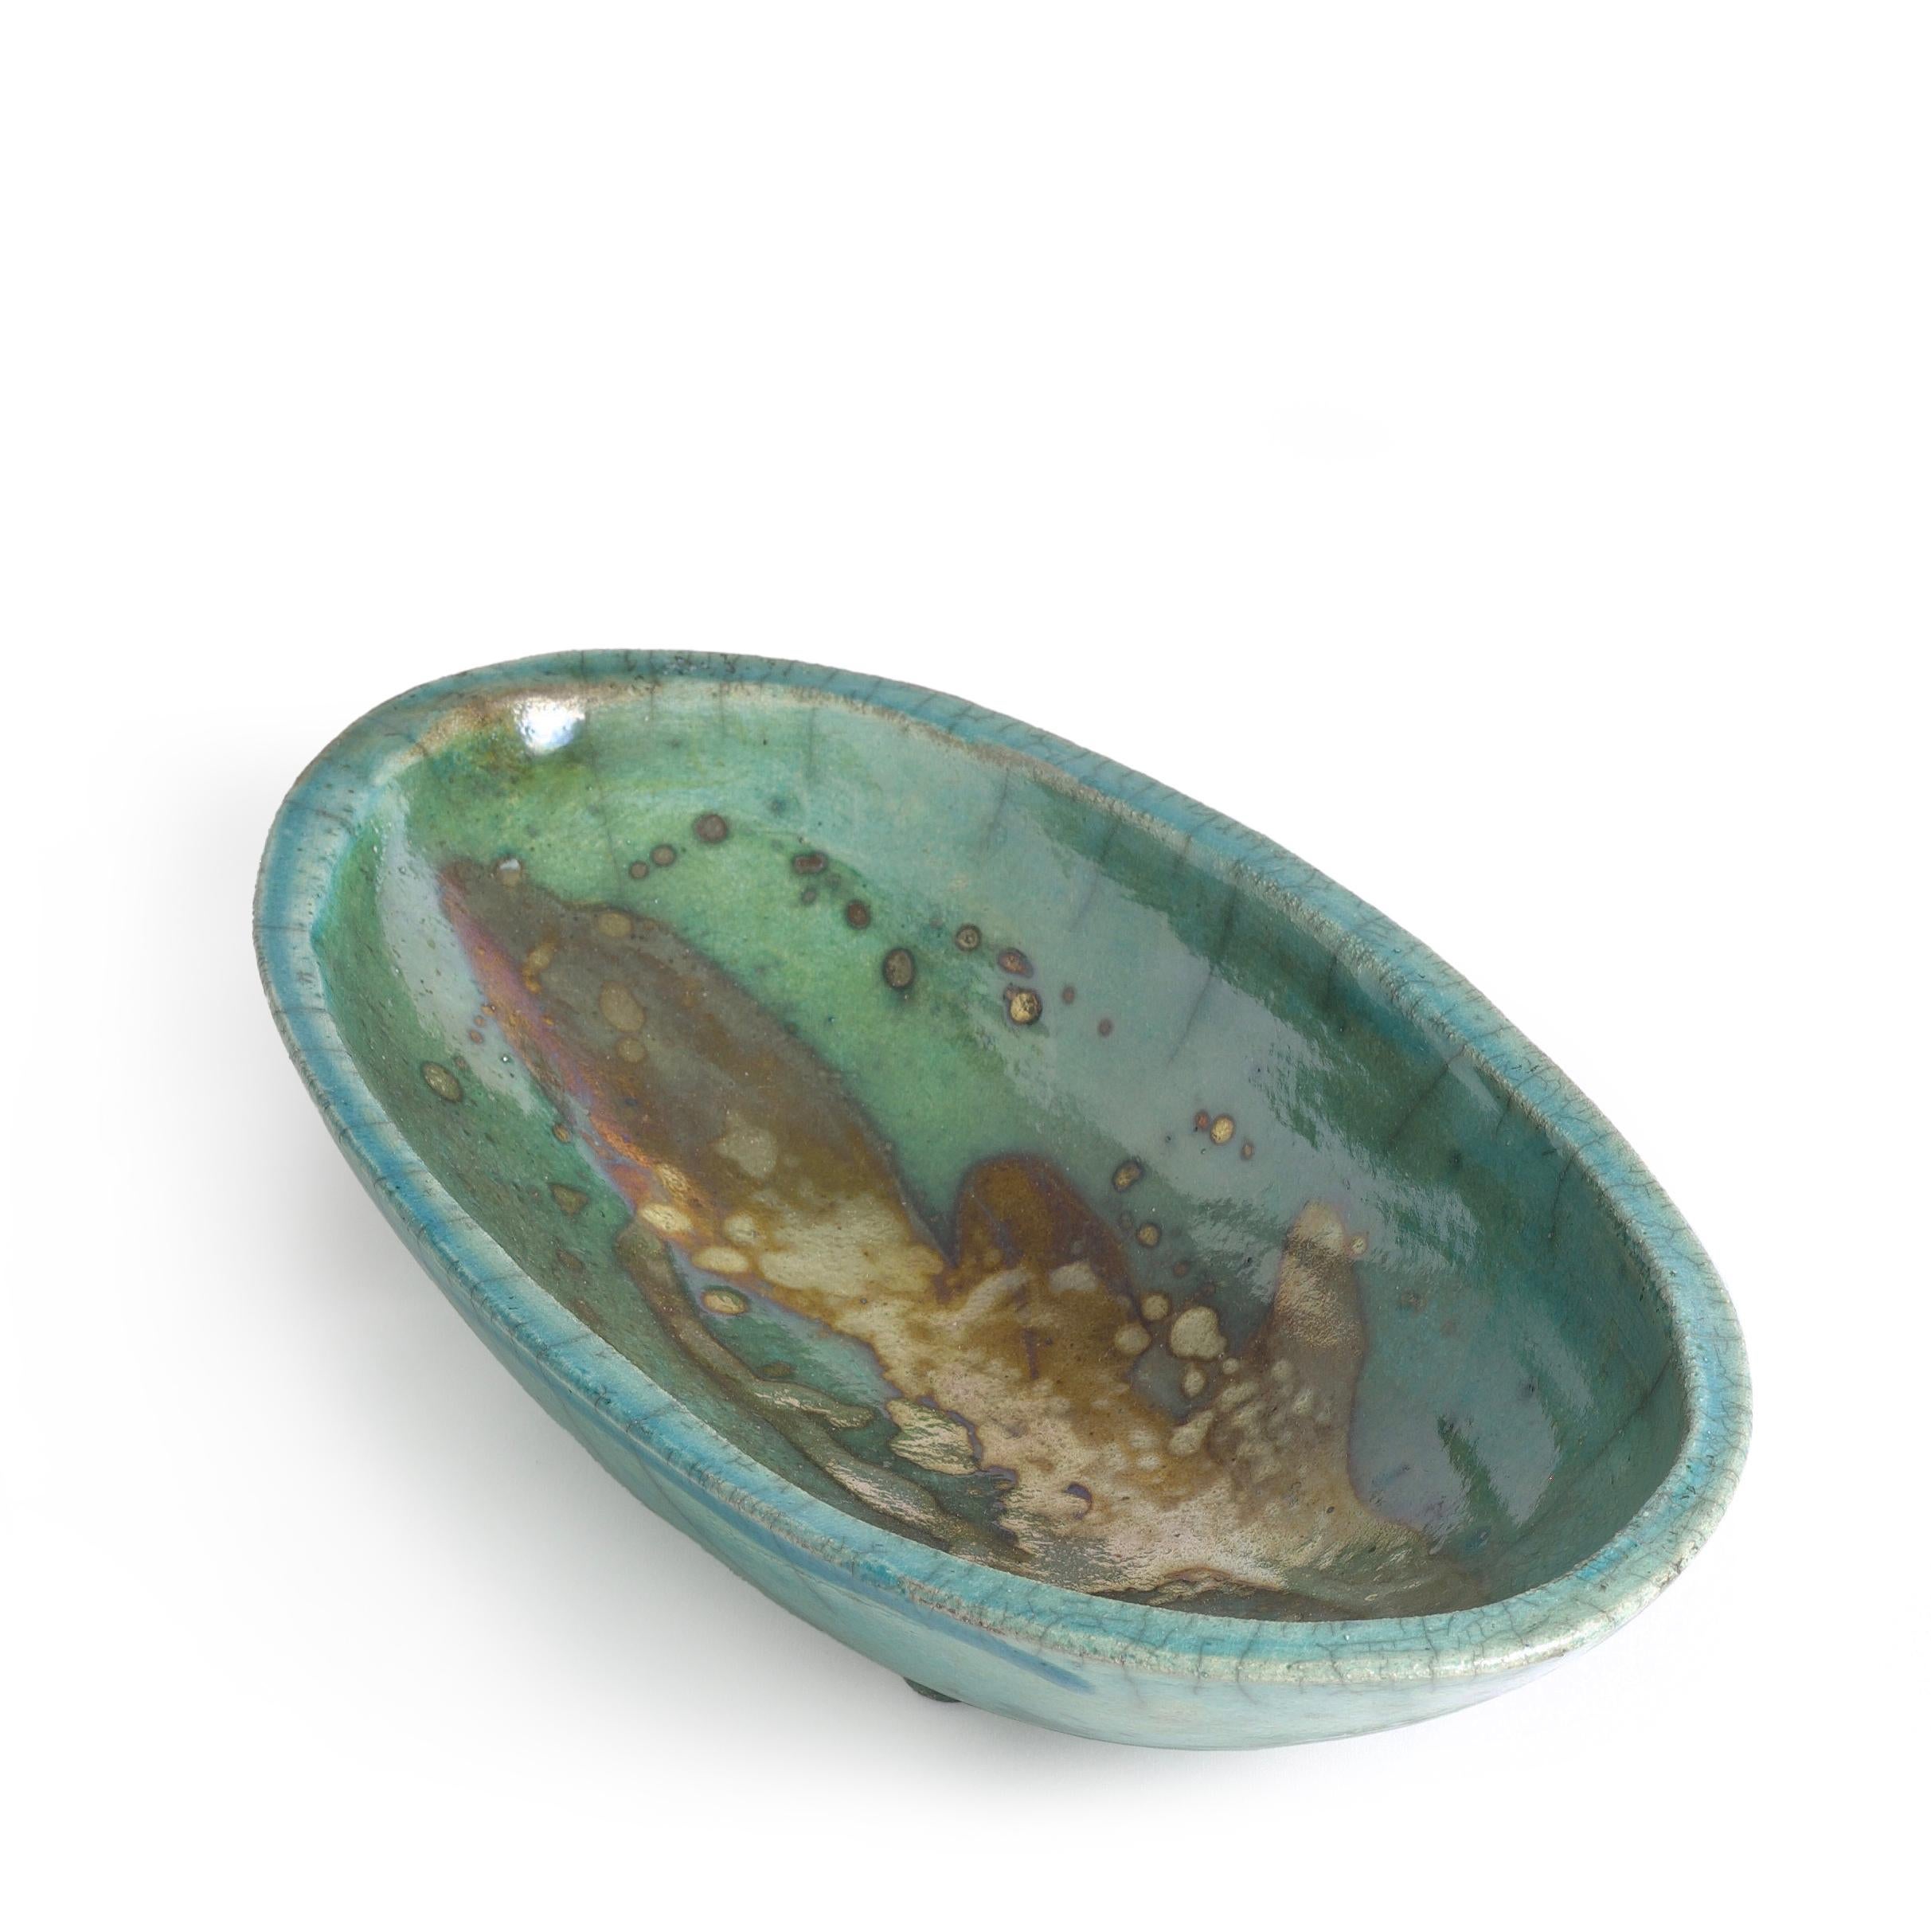 Japanese Modern Long Bowl Legged Raku Ceramic Green Copper In New Condition For Sale In monza, Monza and Brianza